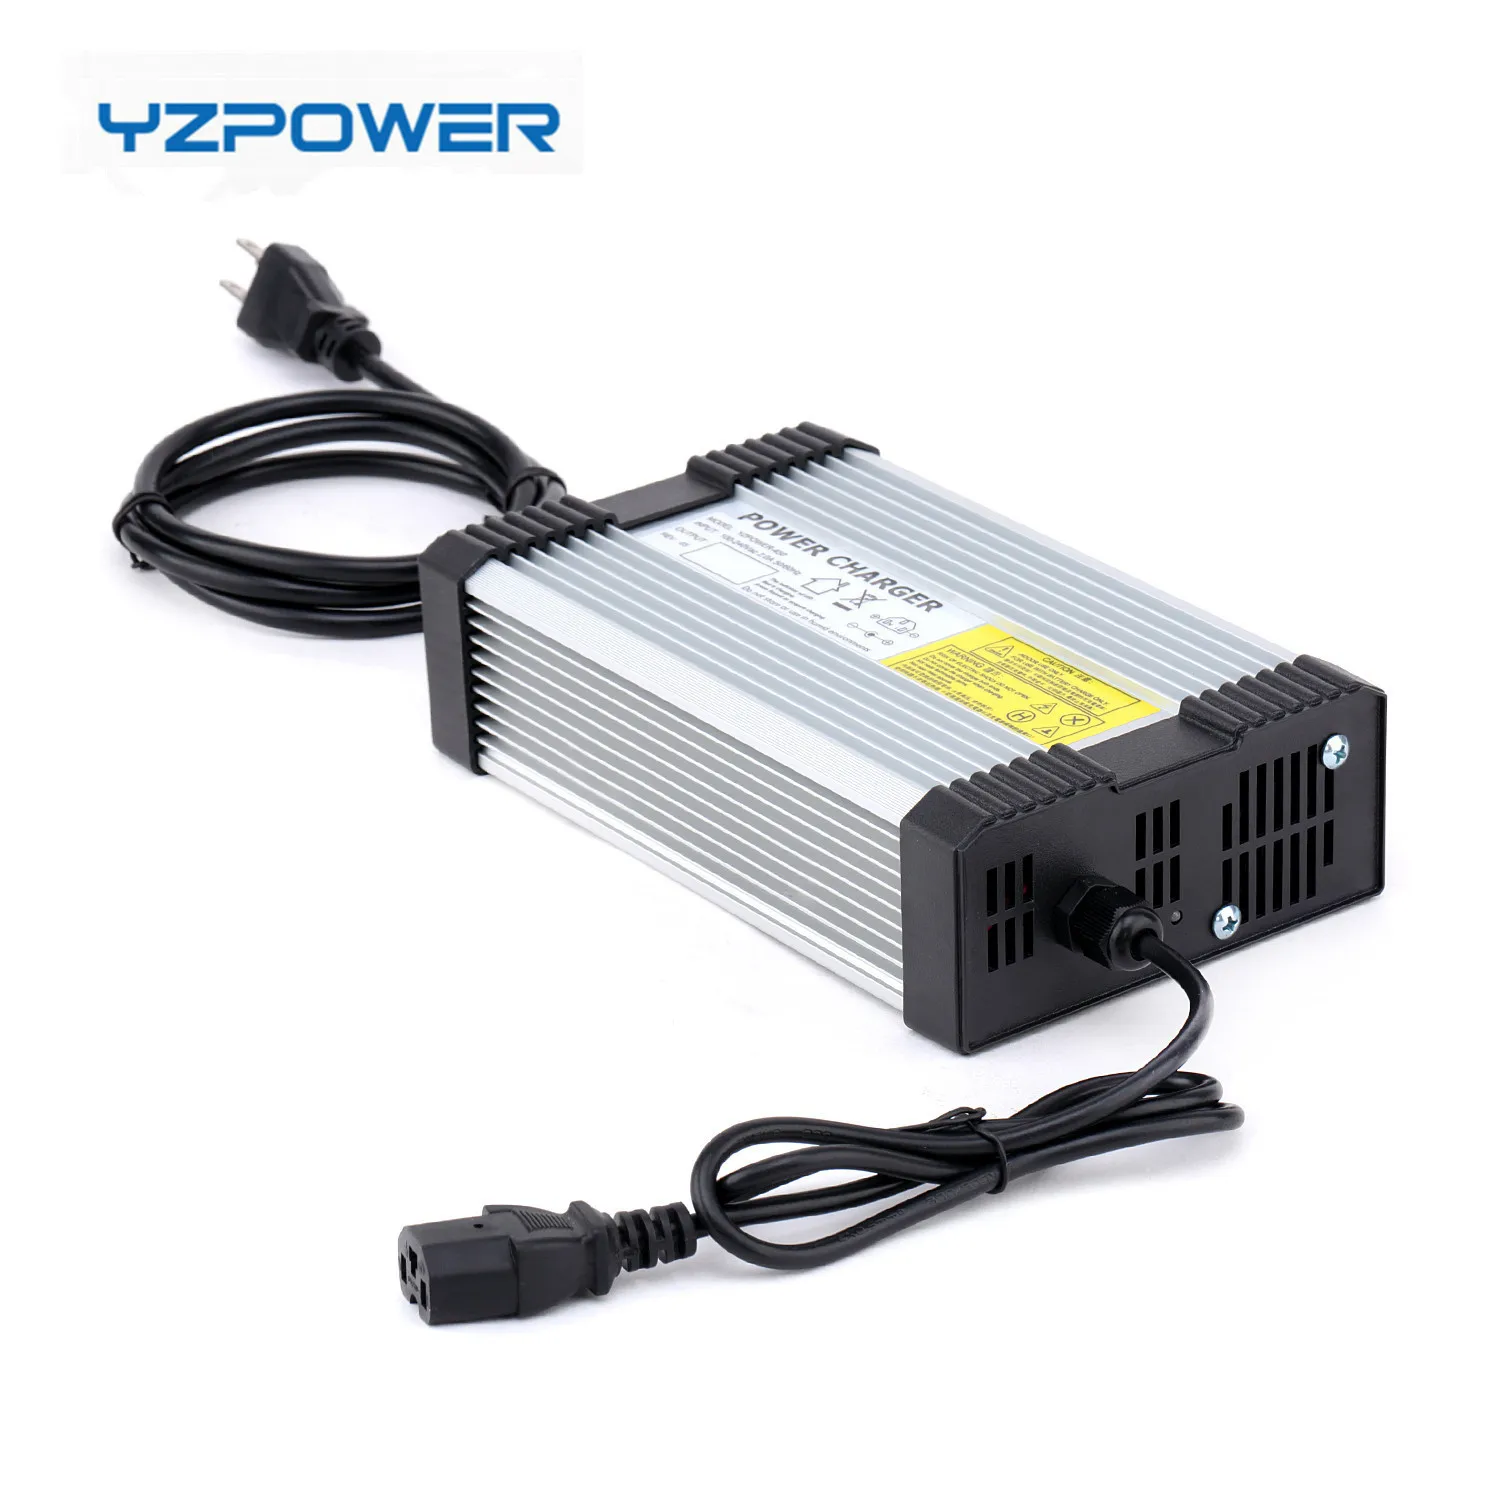 YZPOWER 54.6V8A 13S lithium battery charger for 48V battery pack